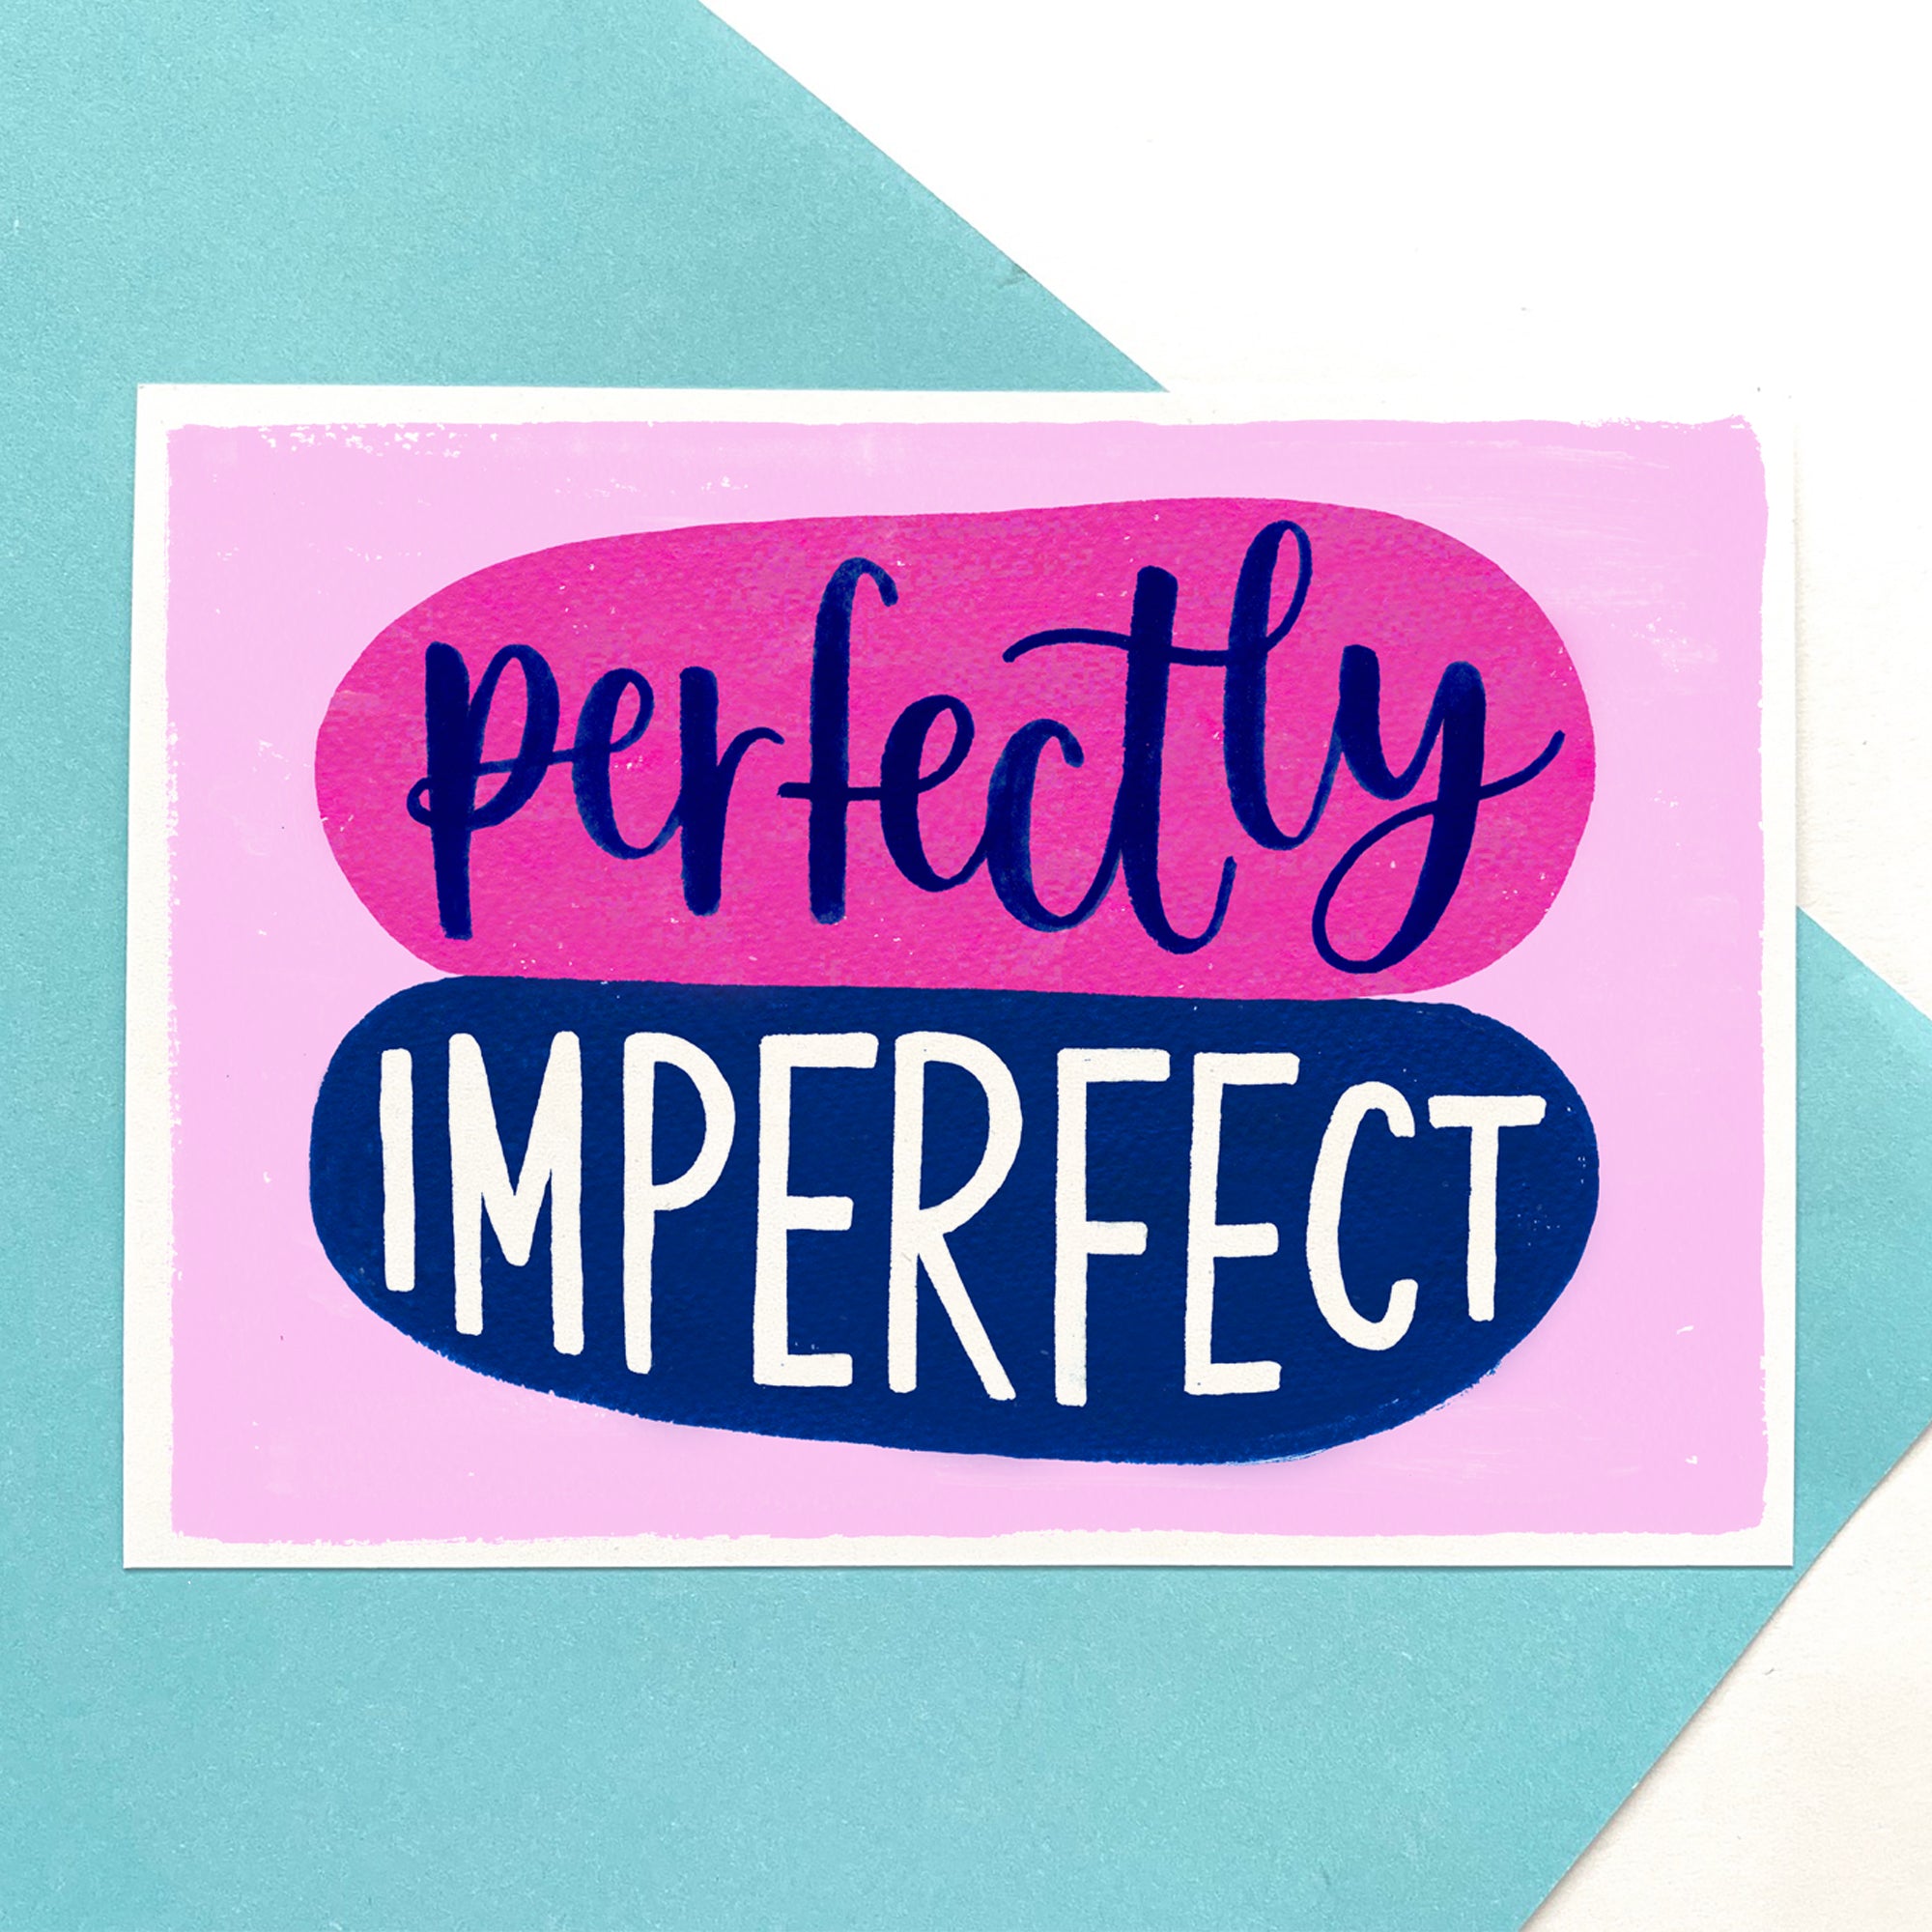 A6 motivational postcard: 'Perfectly imperfect' - printed on recycled card